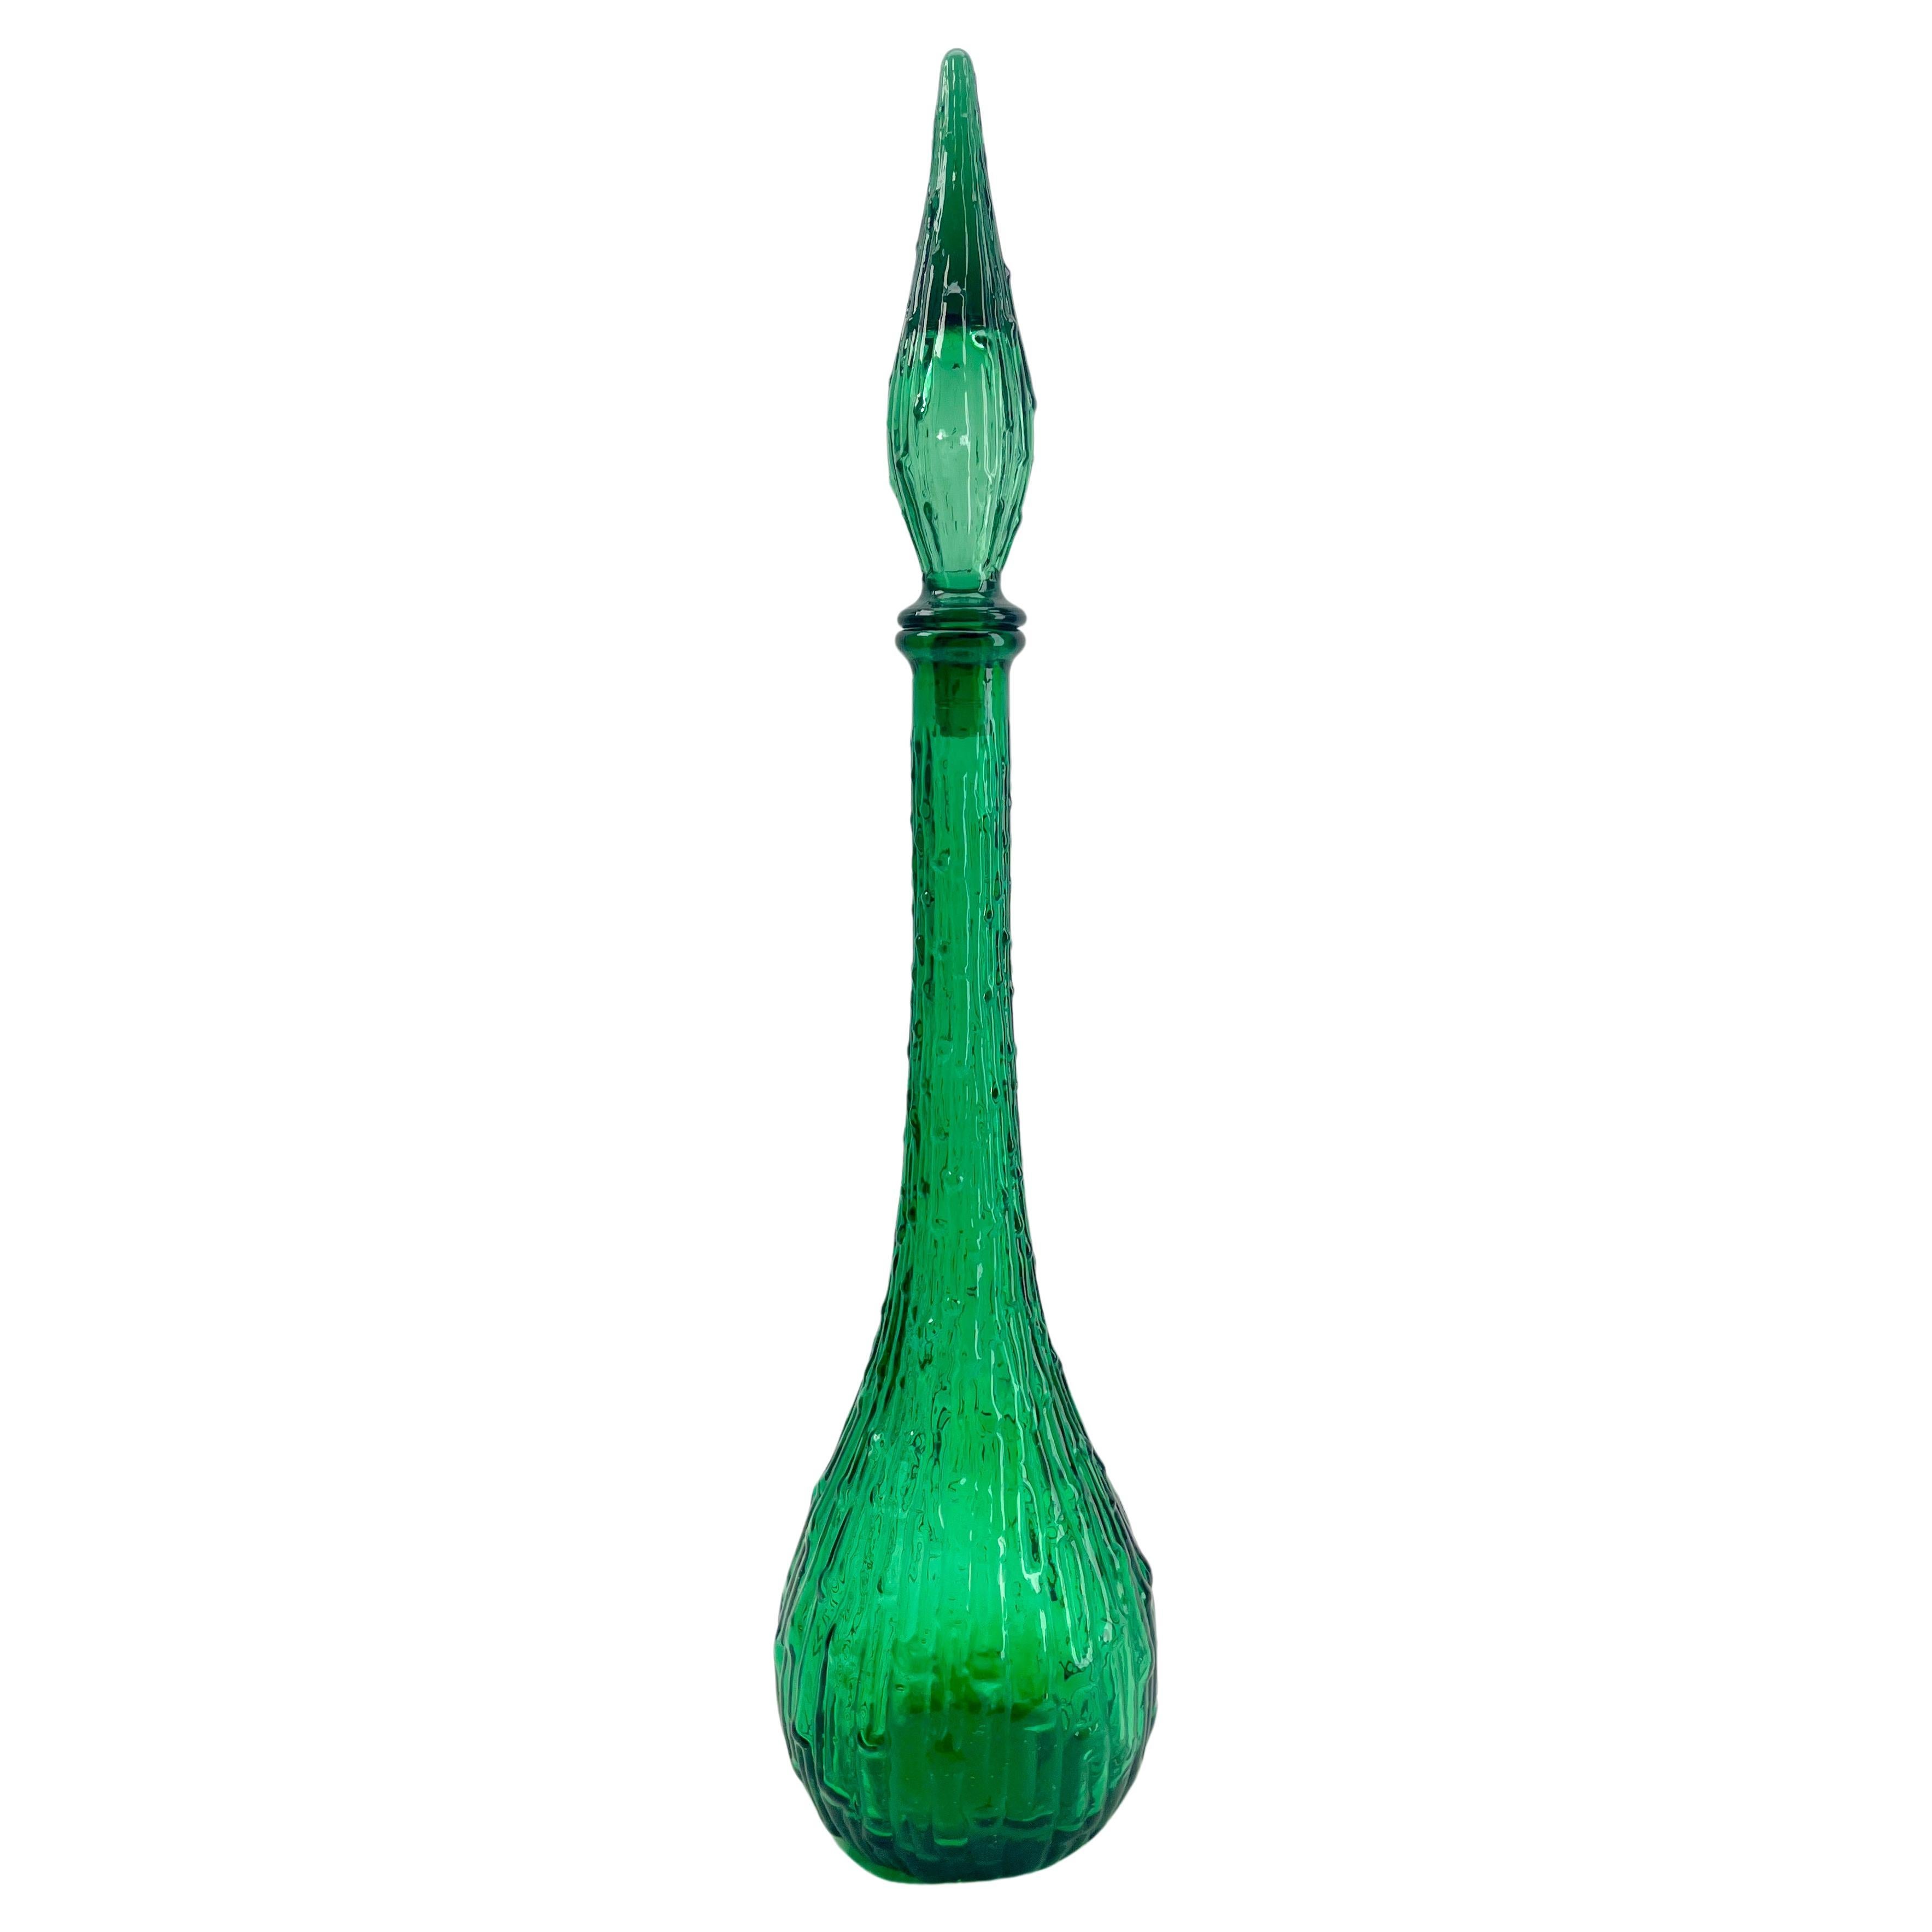 Italian Empoli Geniebottle Green Art Glass from the Mid-20th Century For Sale